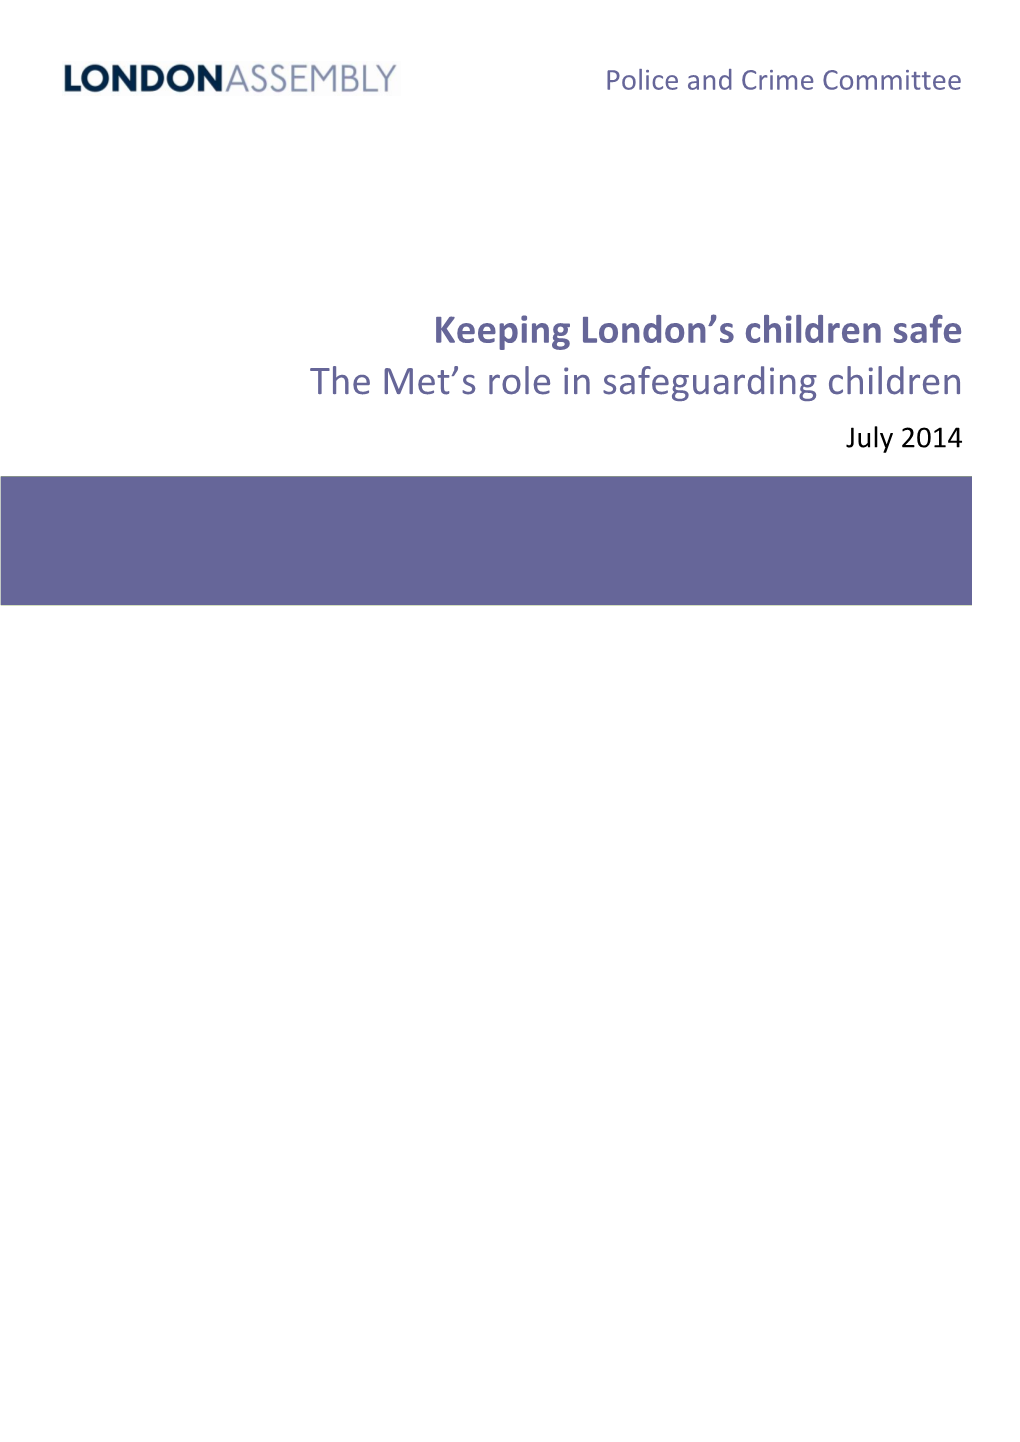 Keeping London's Children Safe the Met's Role in Safeguarding